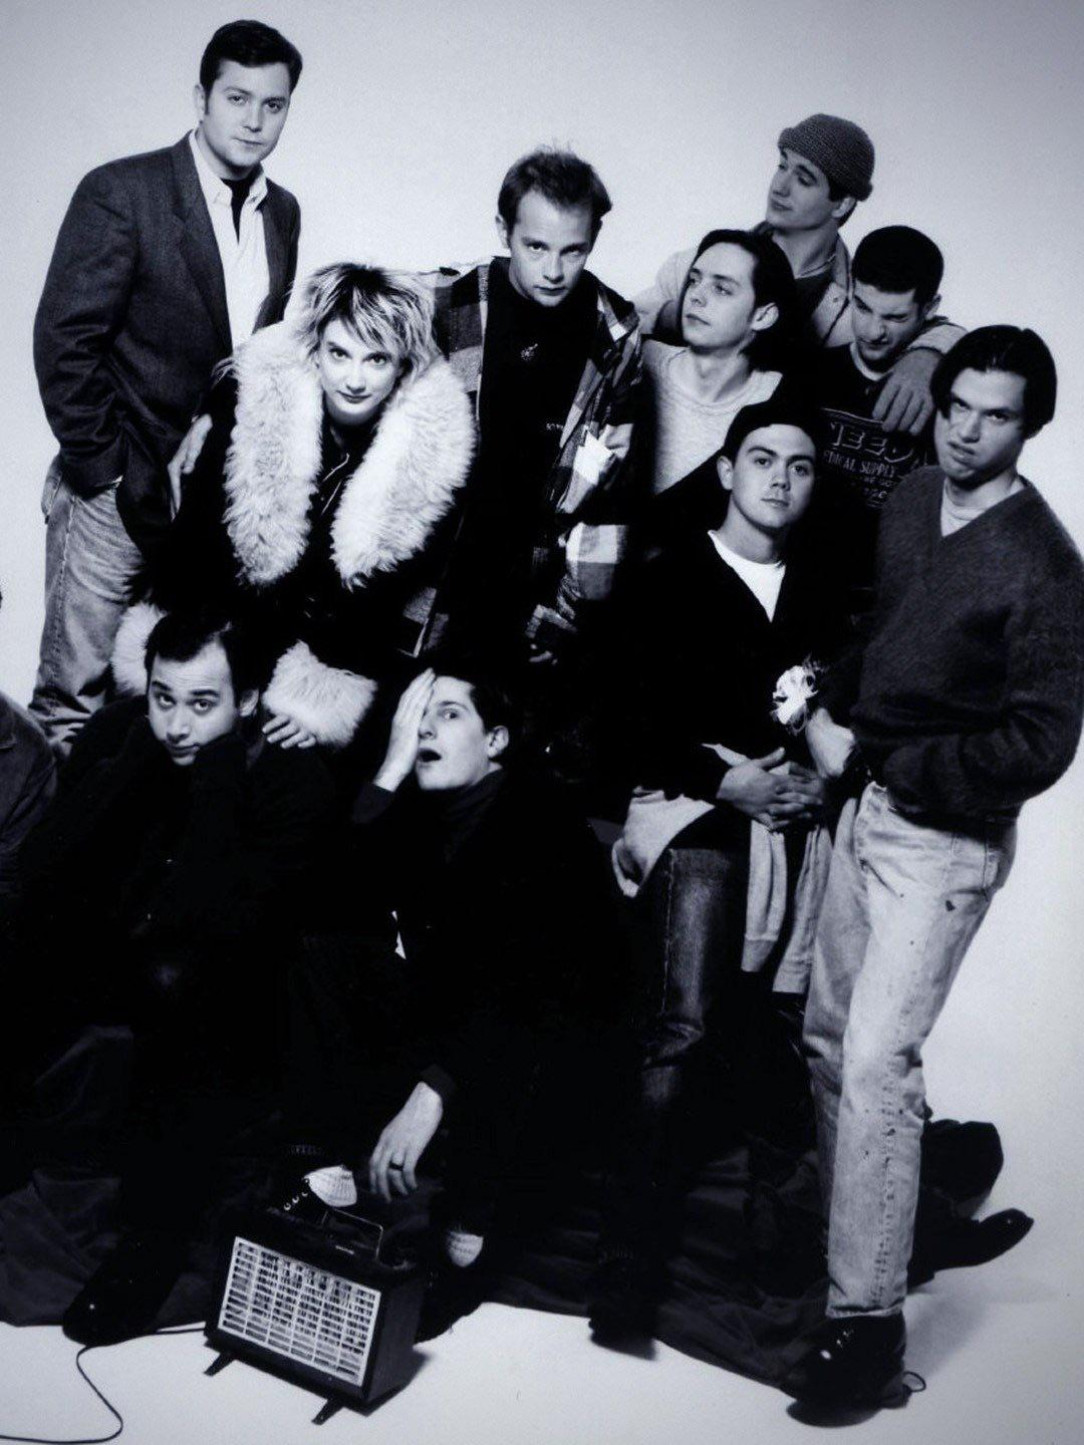 The comedy troupe The State whose show on MTV ran from 1993 to 1995